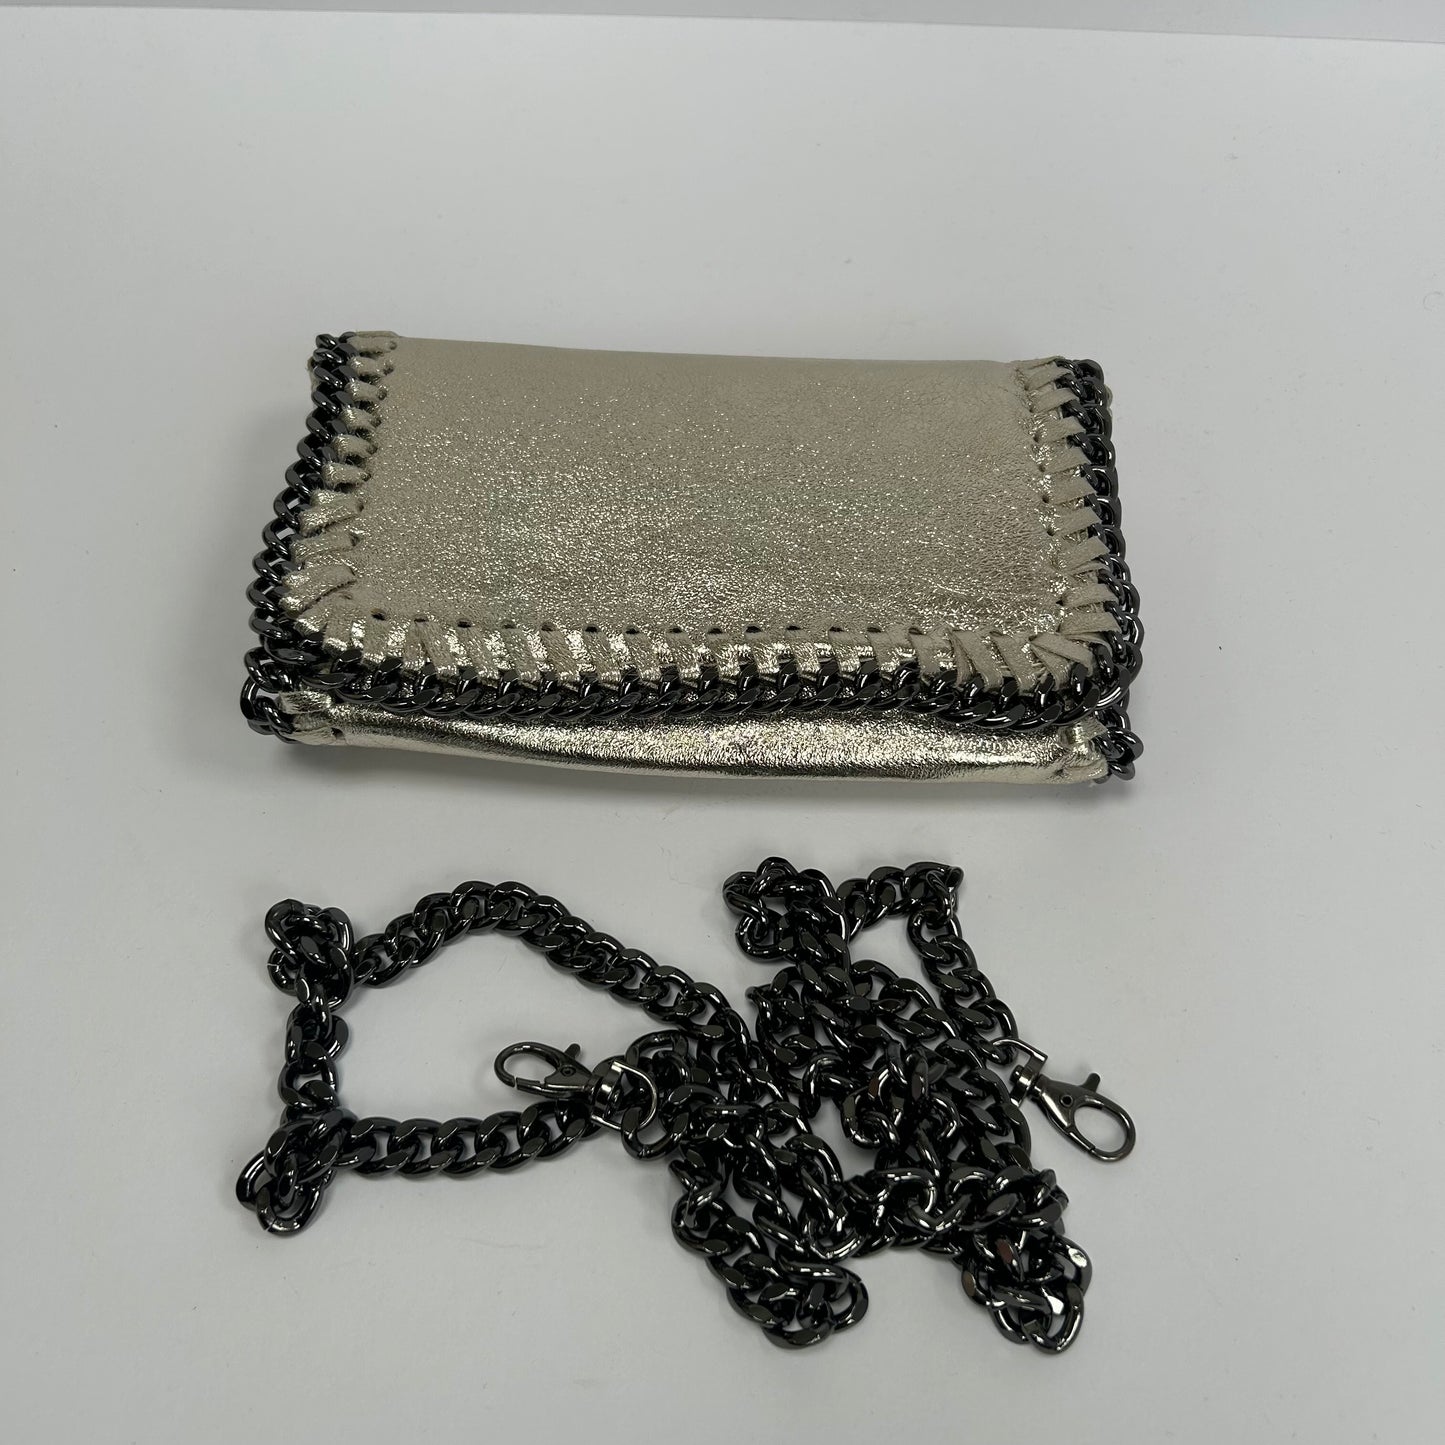 Gold and chain leather clutch / crossbody SAMPLE